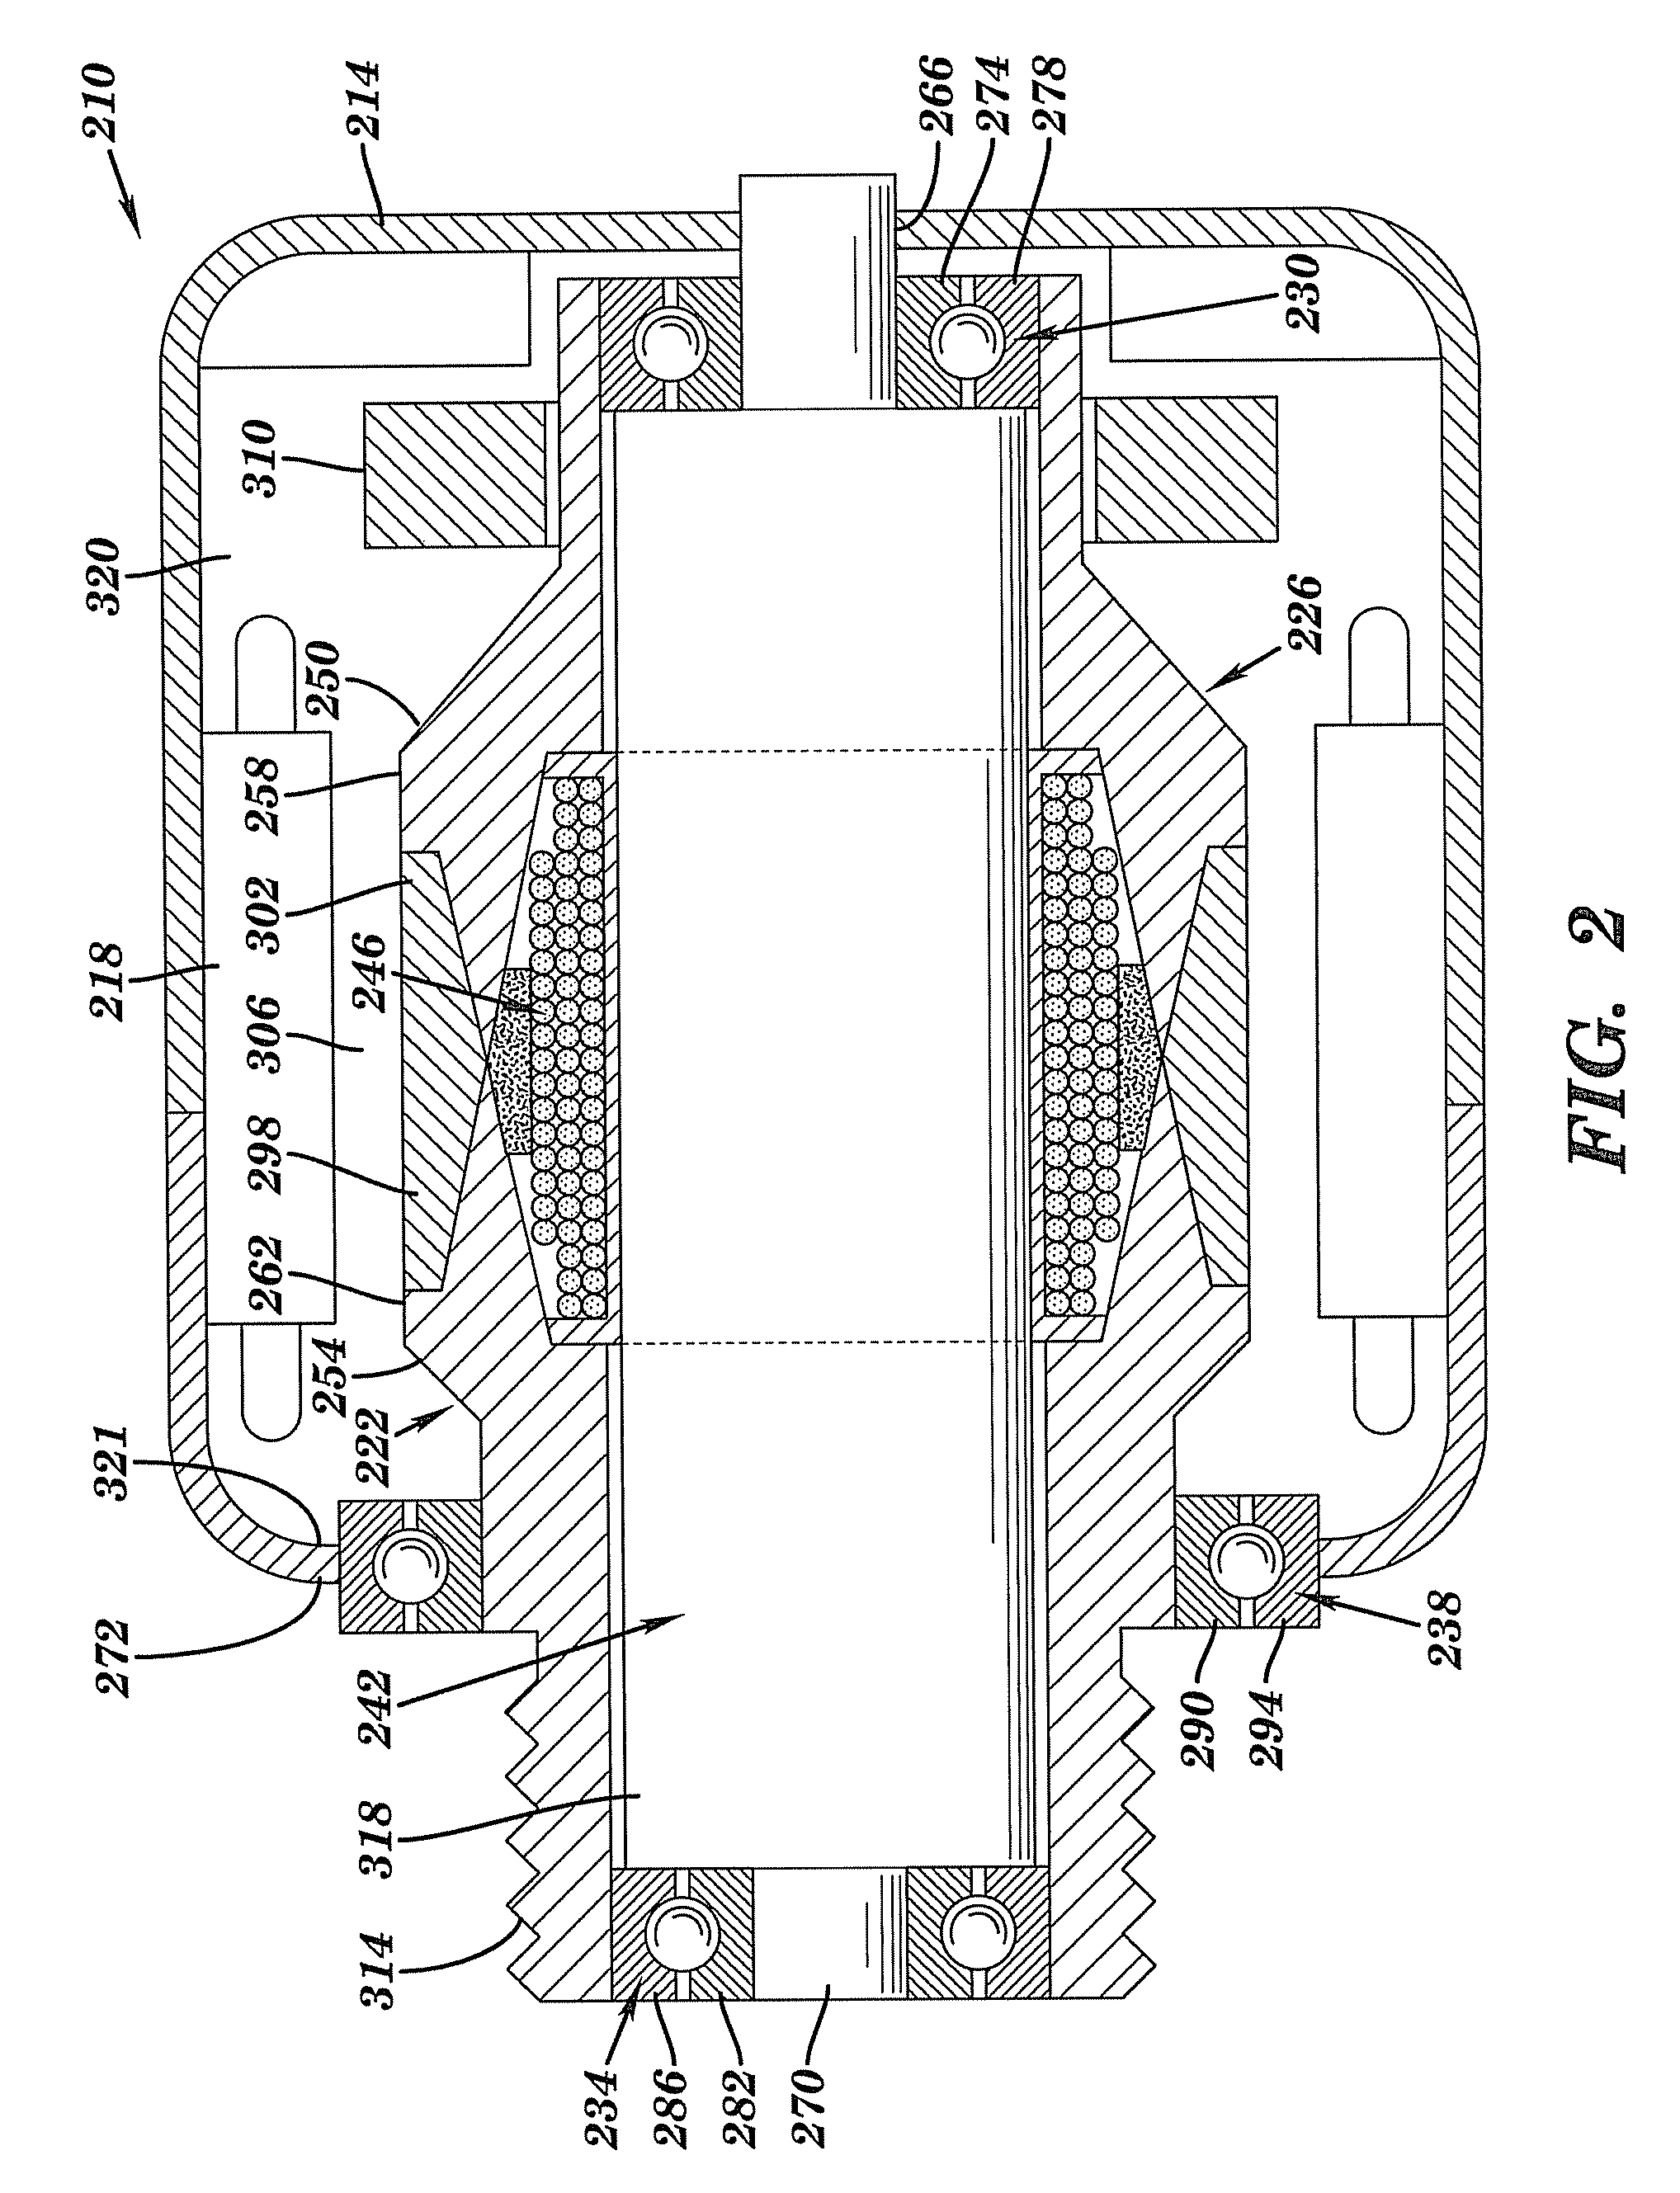 Brushless electric machine with stationary shaft and method of making same